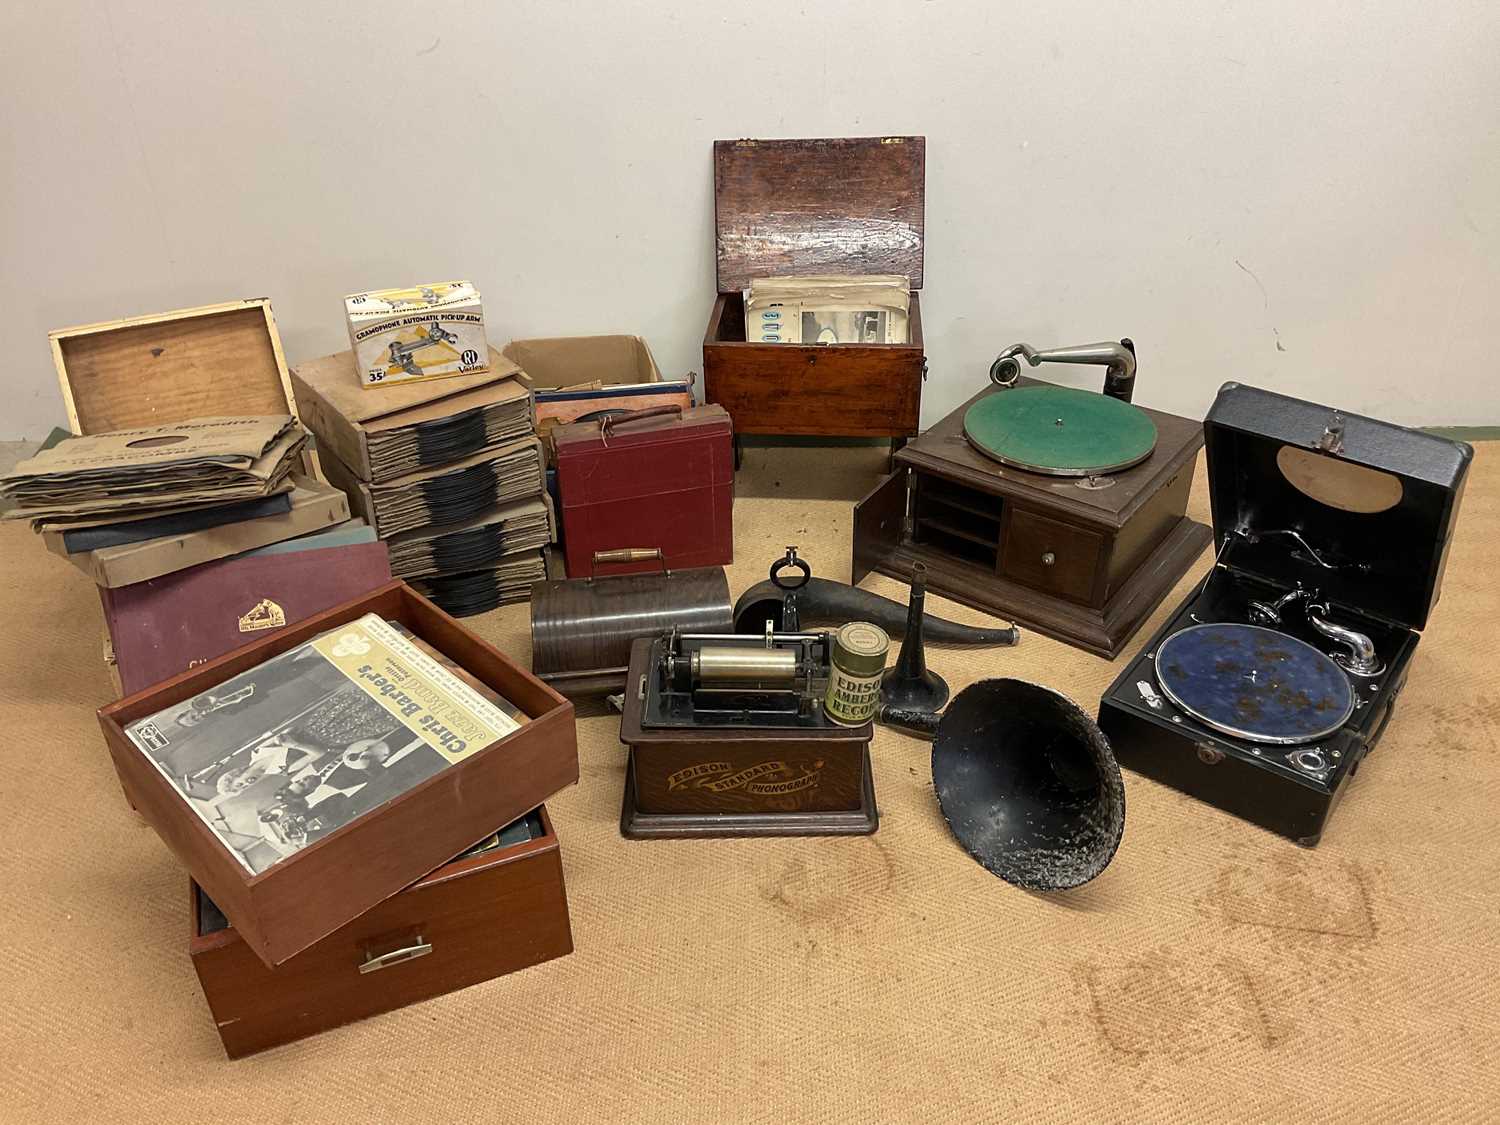 An Edison Standard phonograph, two gramophones, assorted horns, and a large collection of 78 records